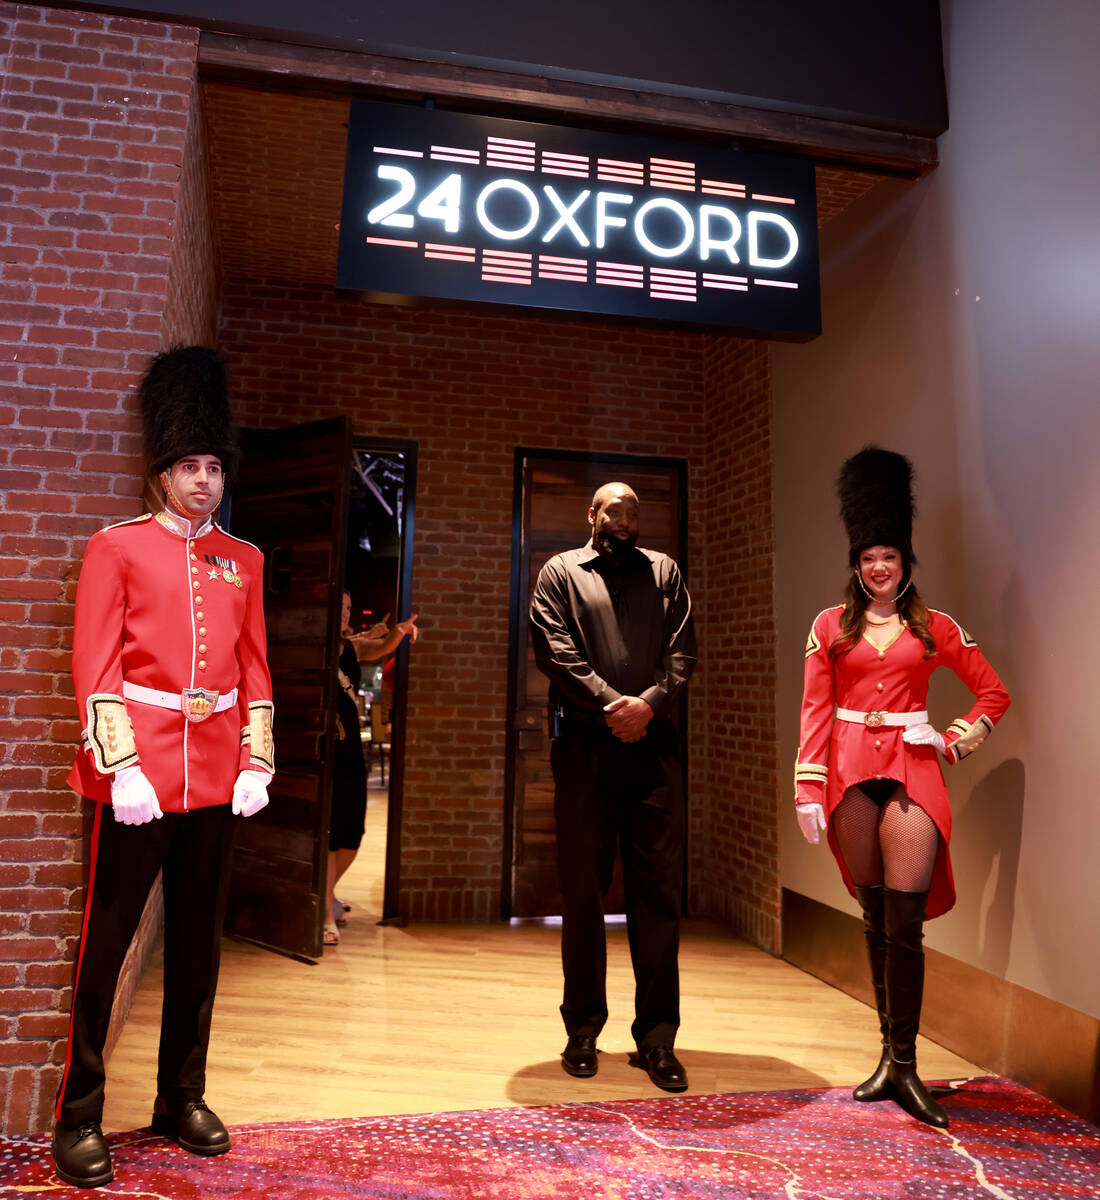 Models dressed as Beefeaters, who declined to give their names, welcome guests to a press confe ...